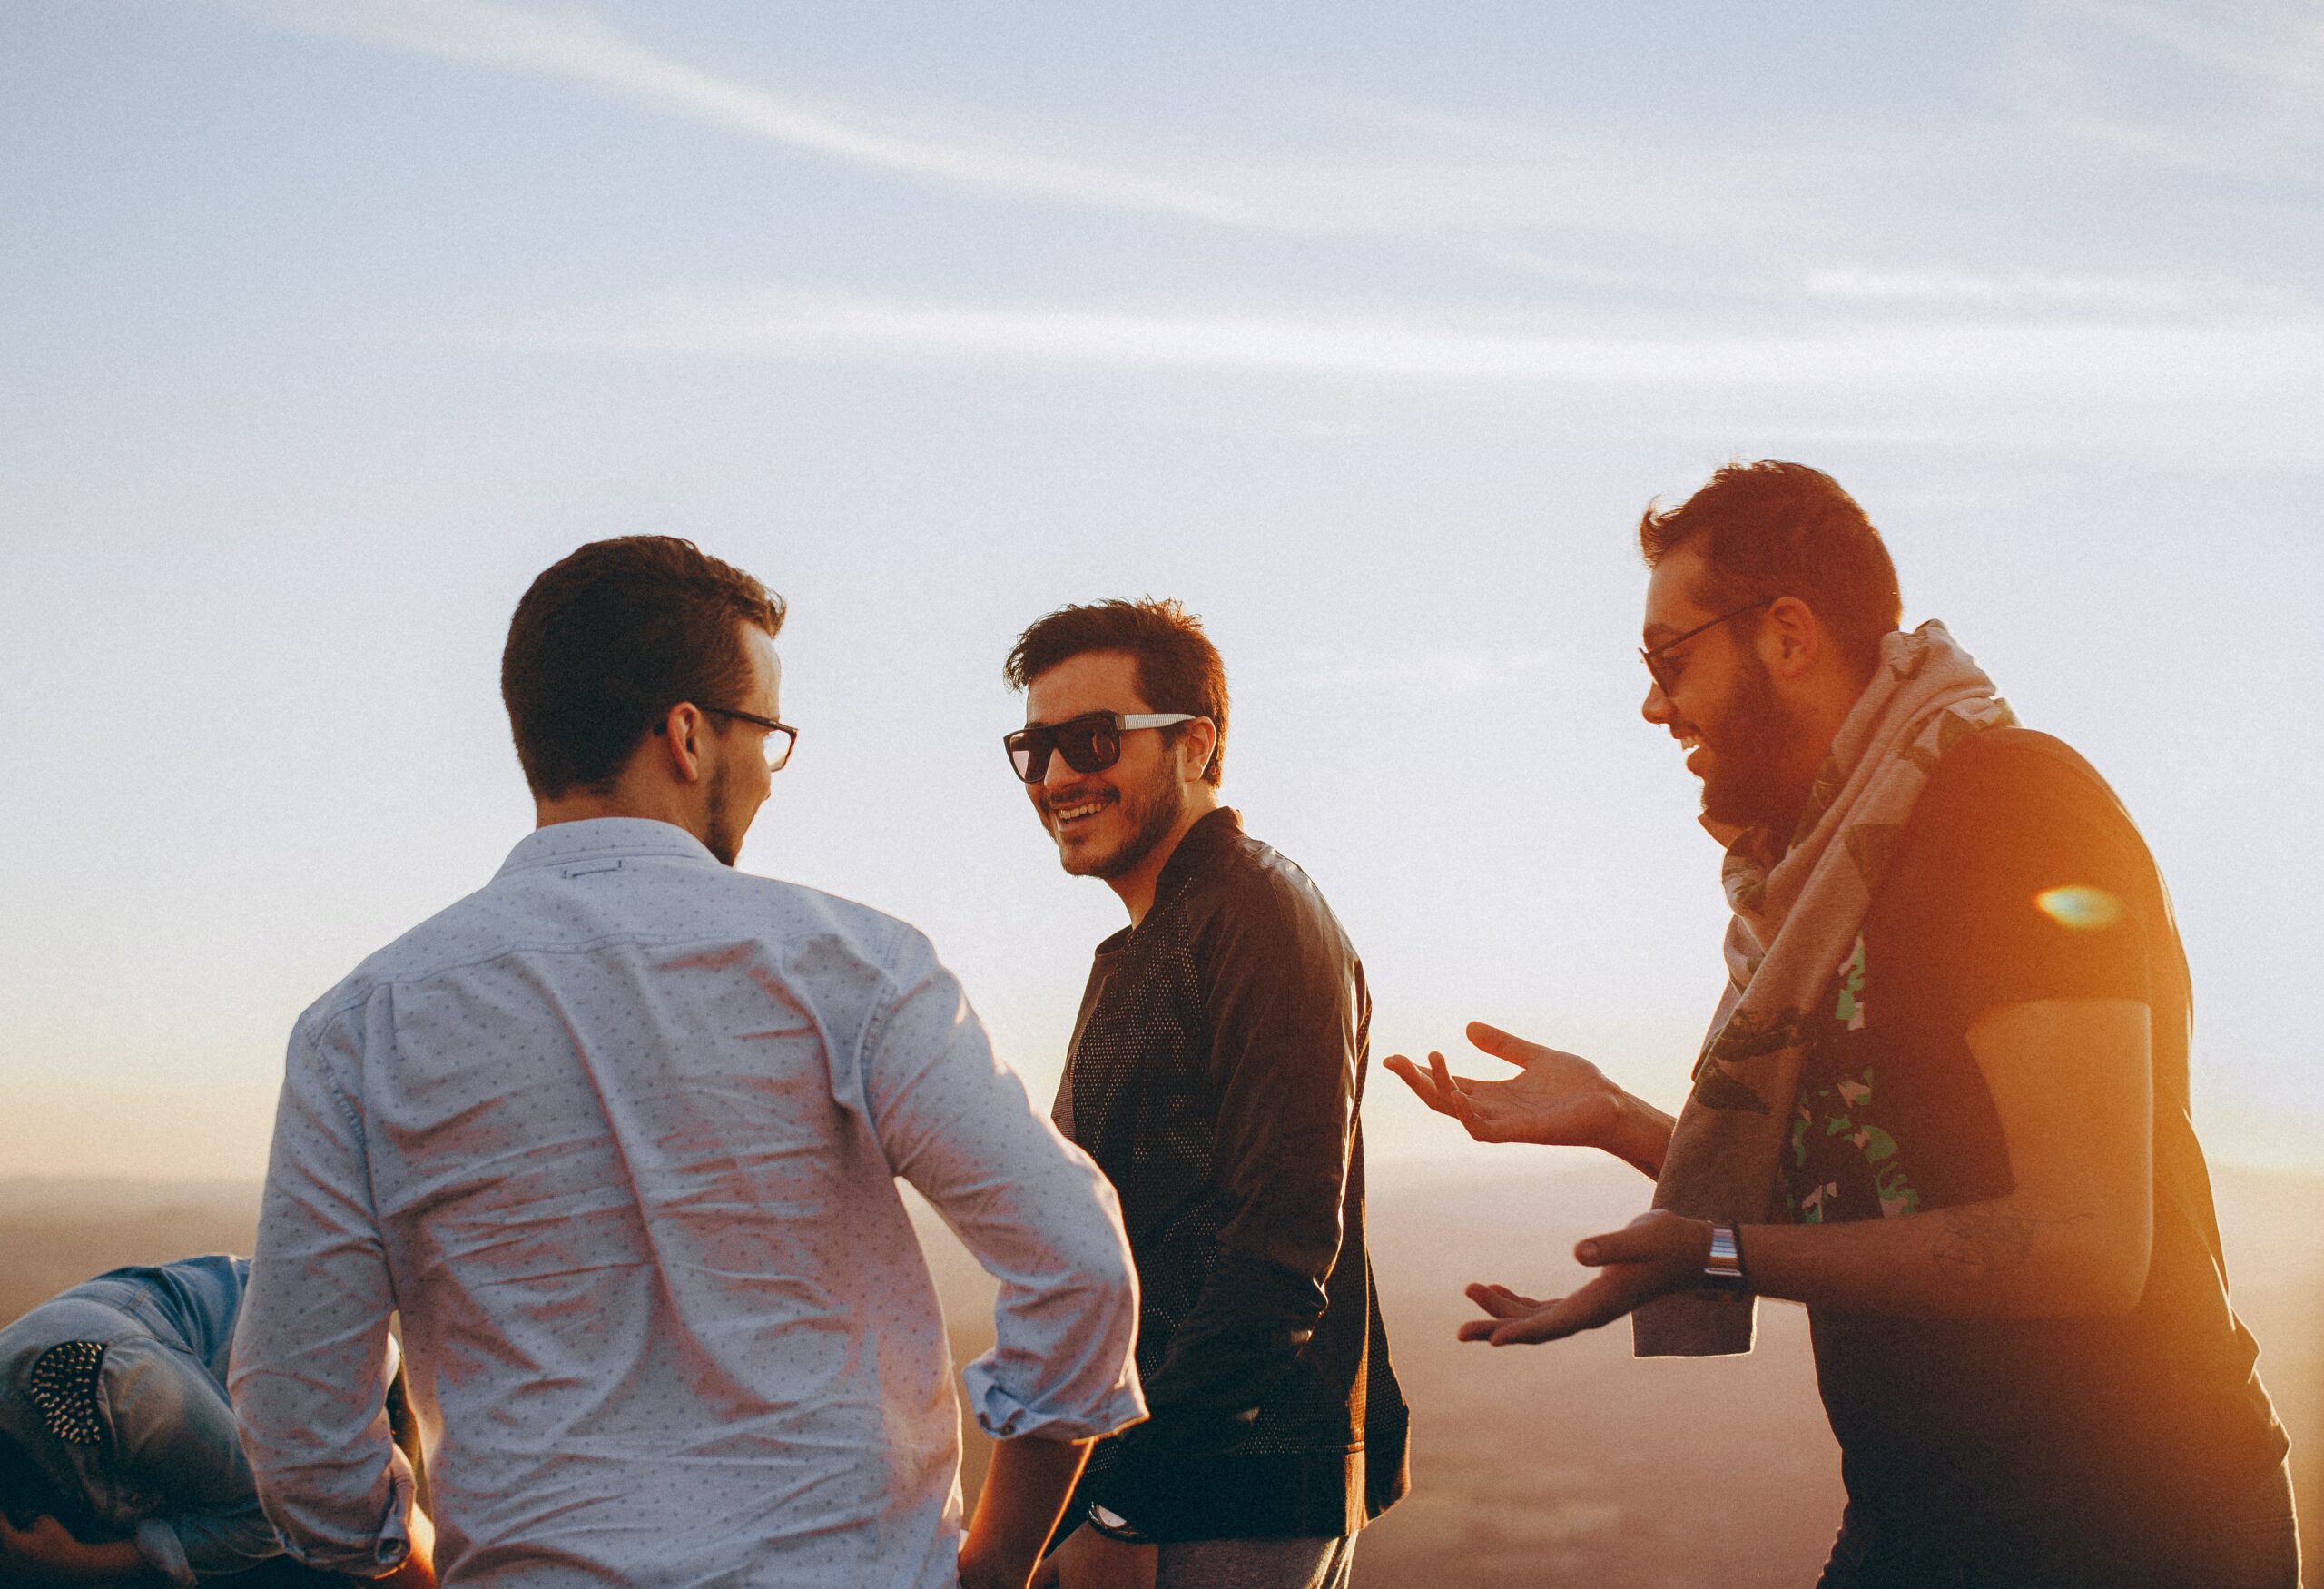 Three men looking happy as they talk together at sunset.